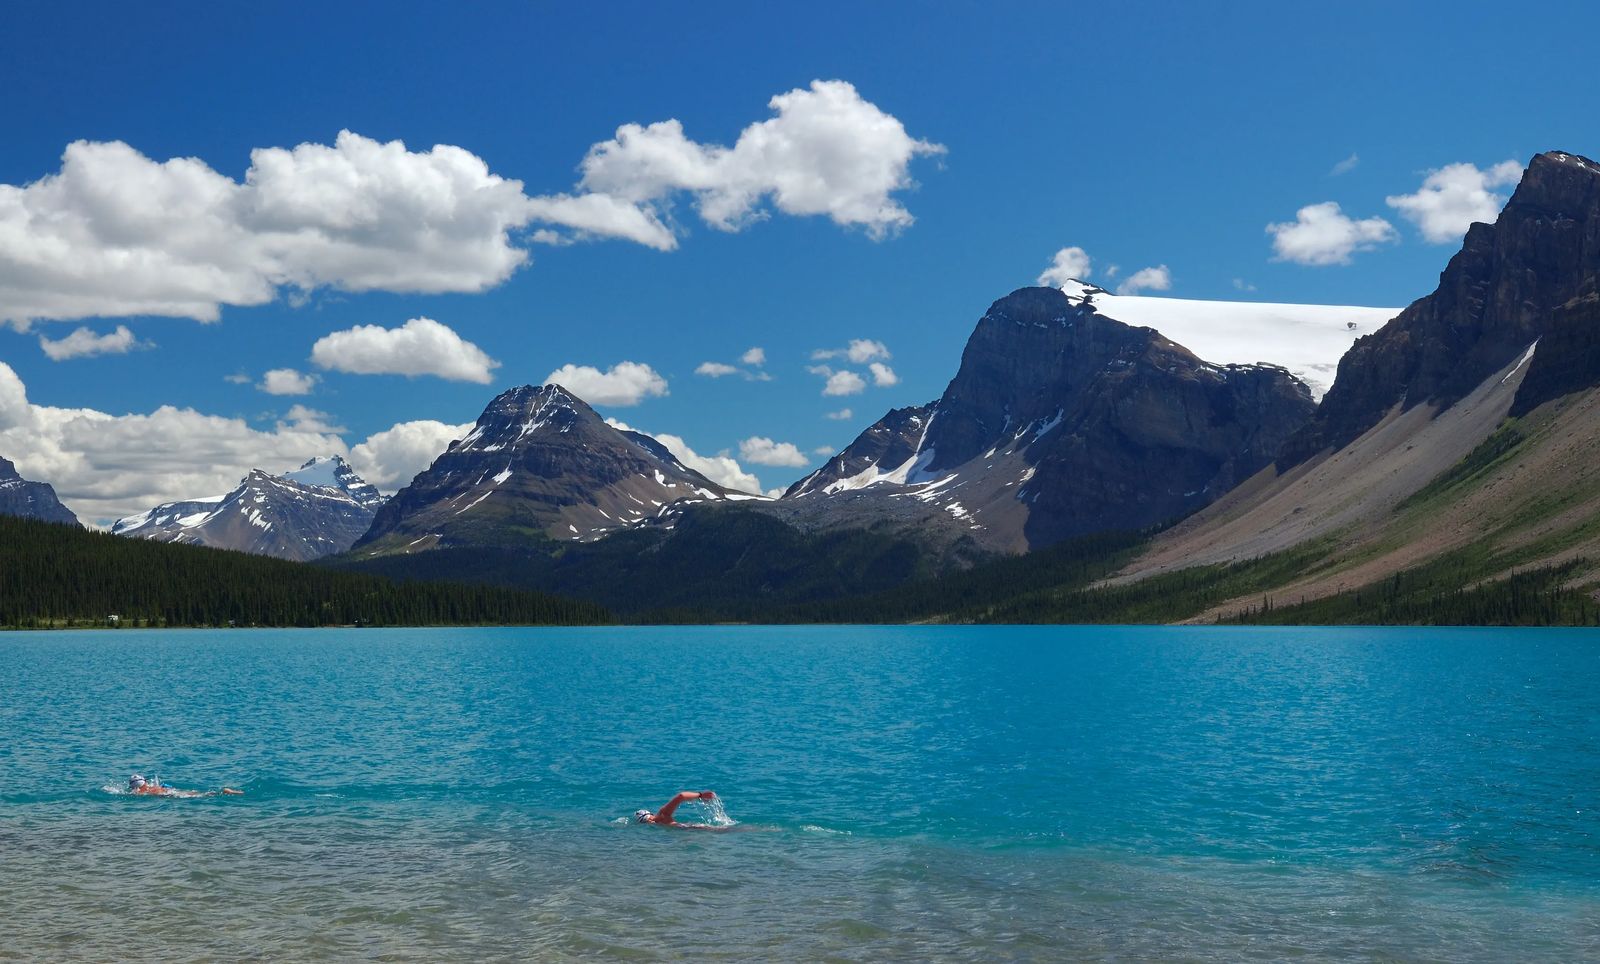 two people swimming in Hector Lake - The BEST of the Icefields Parkway Banff